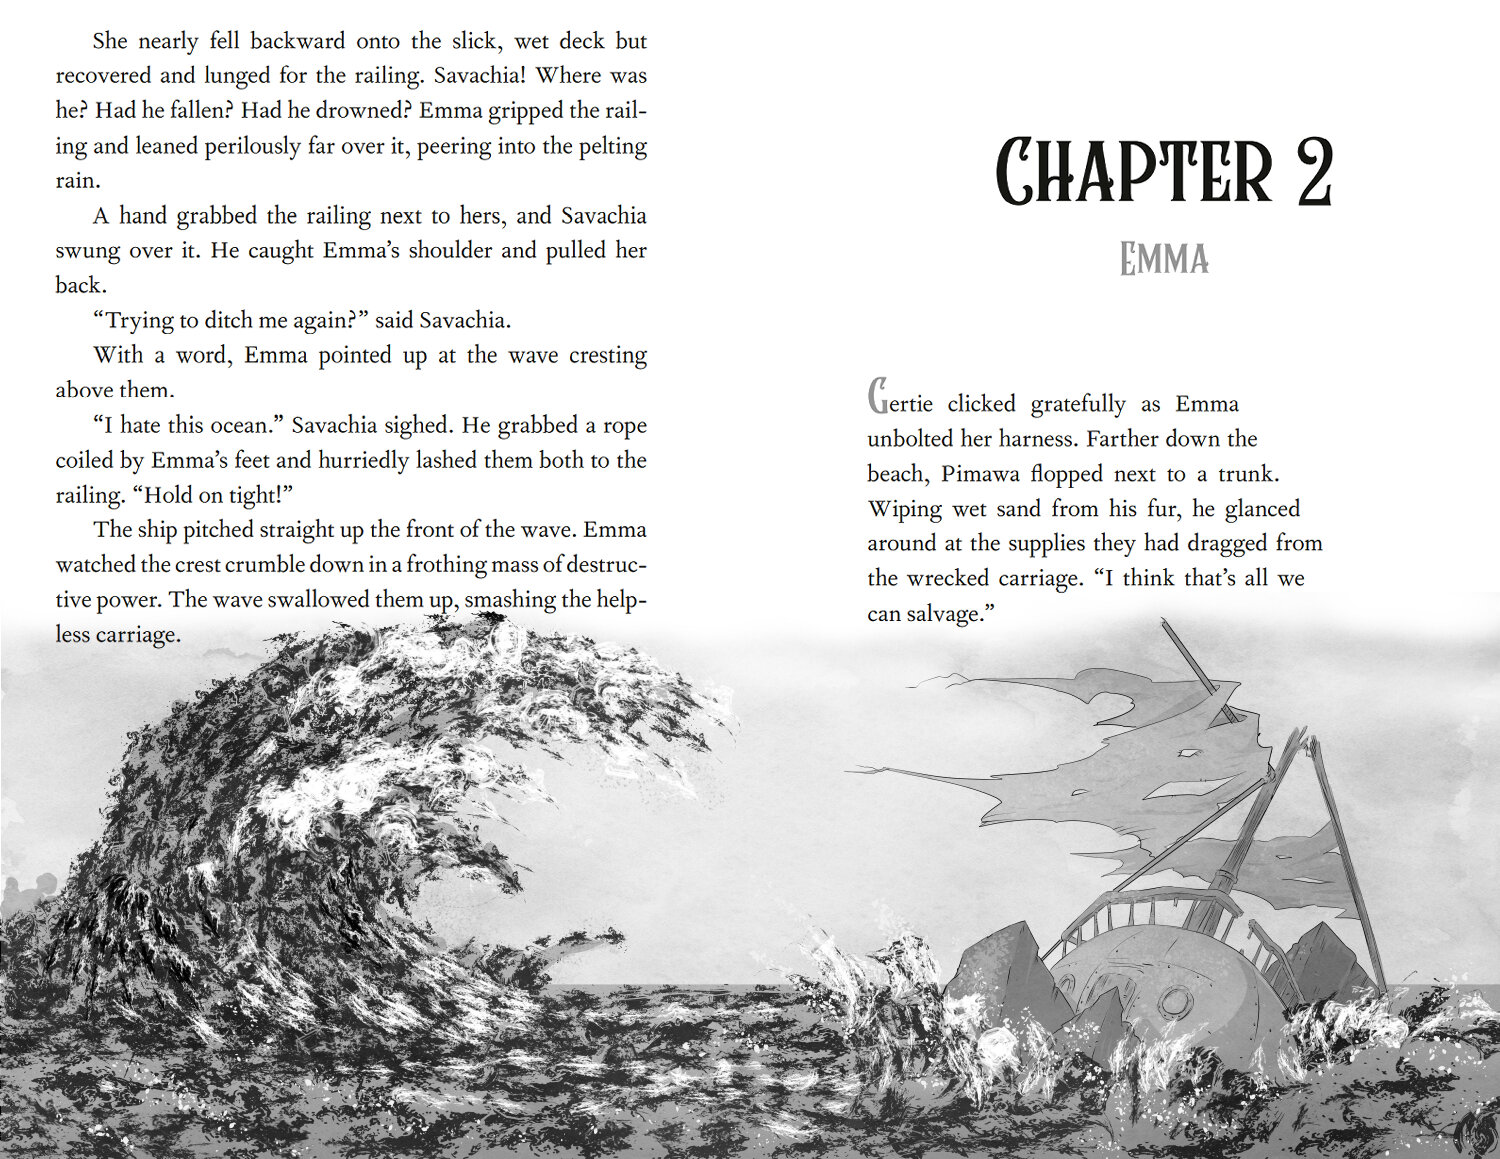 Preview book chapters